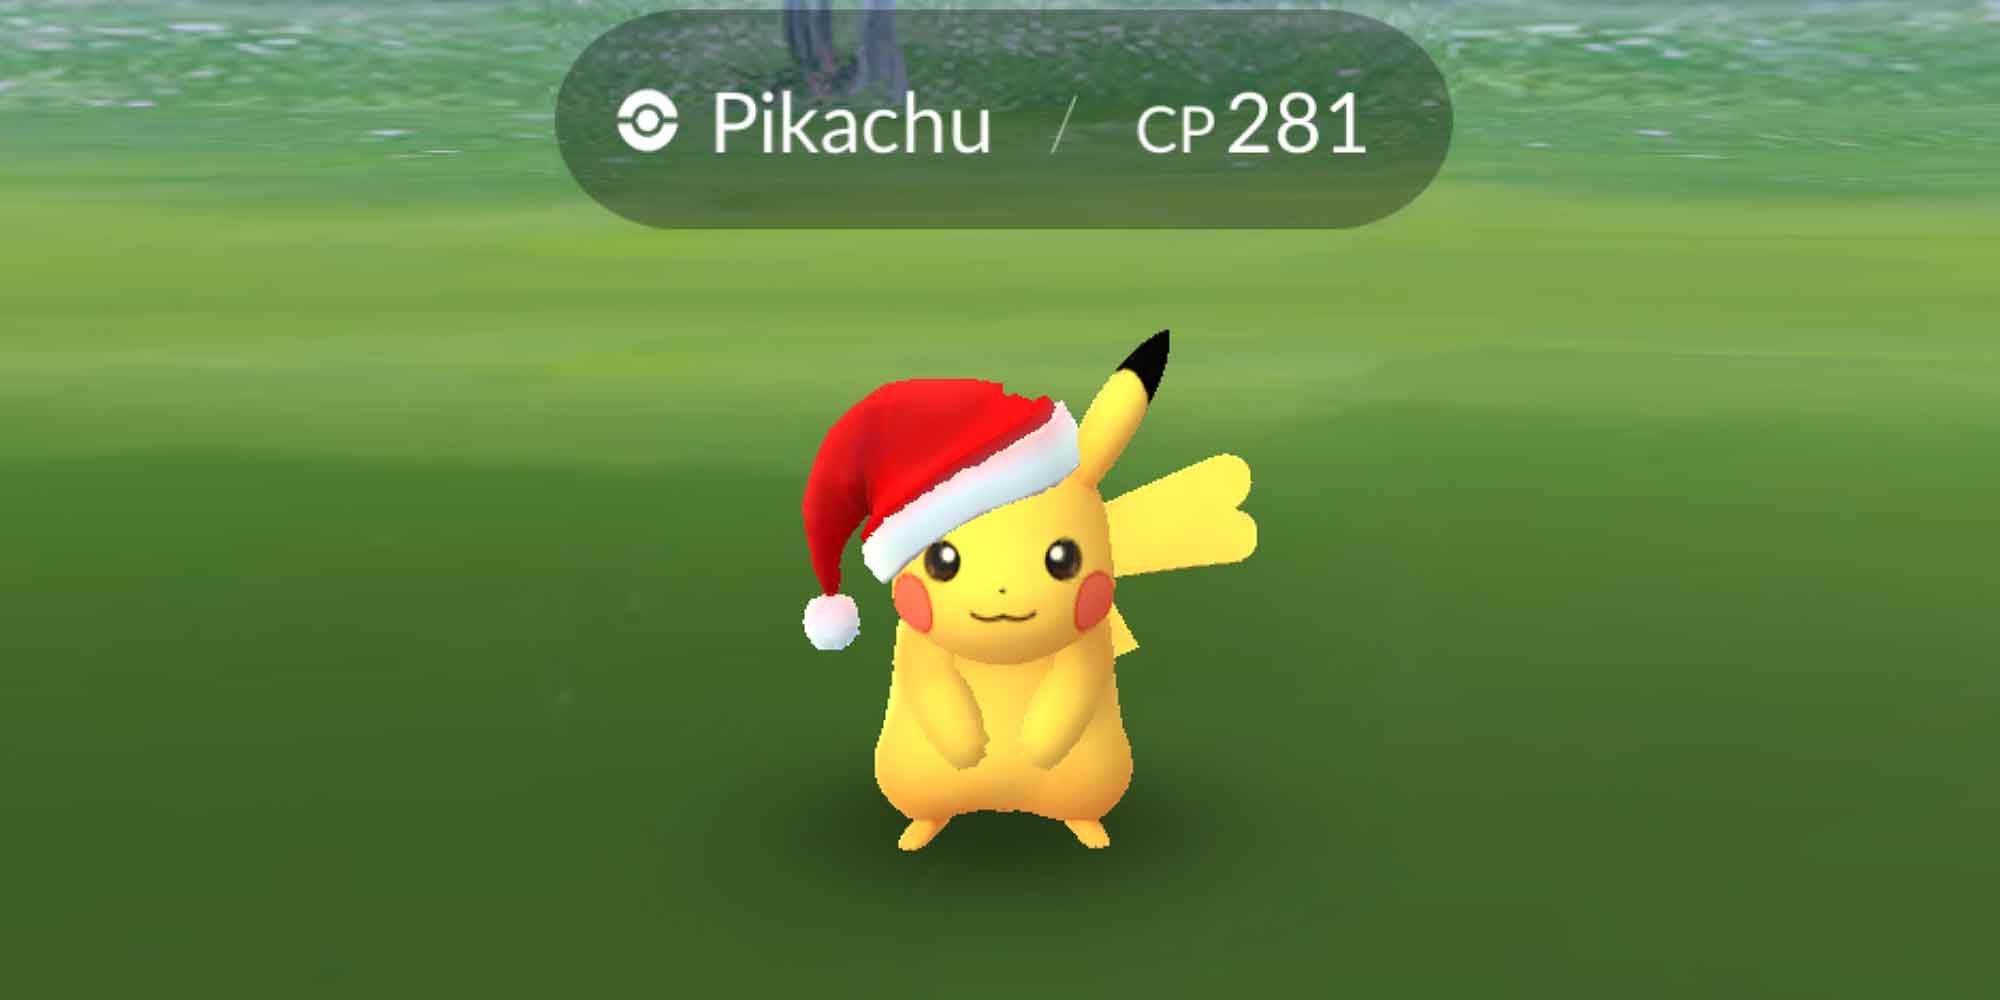 Catching a special Pikachu in Pokemon Go